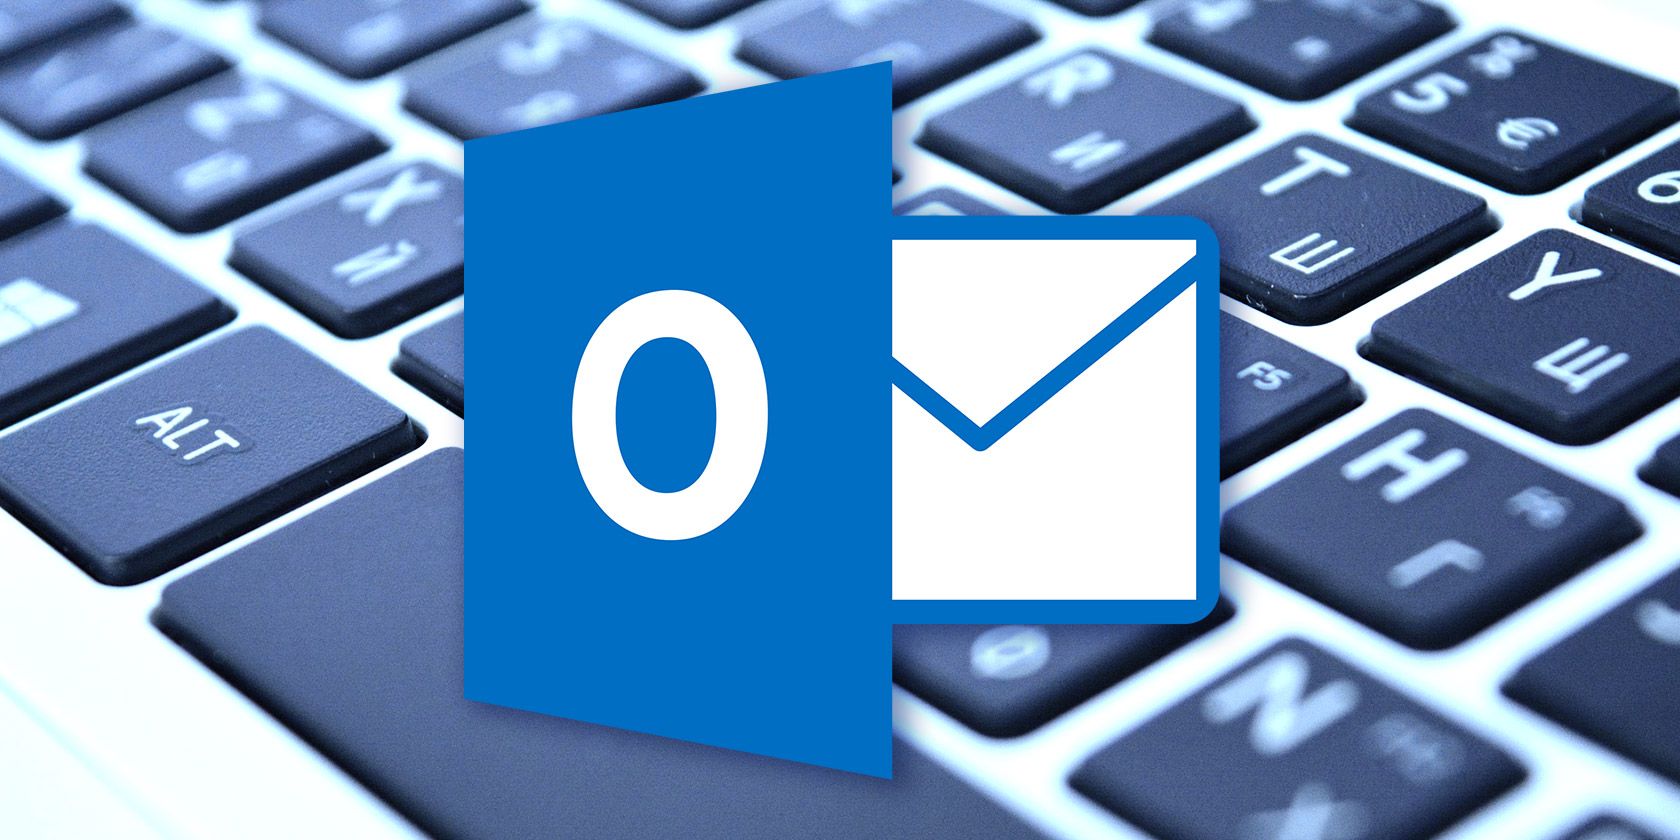 how to increase font size in outlook with keyboard